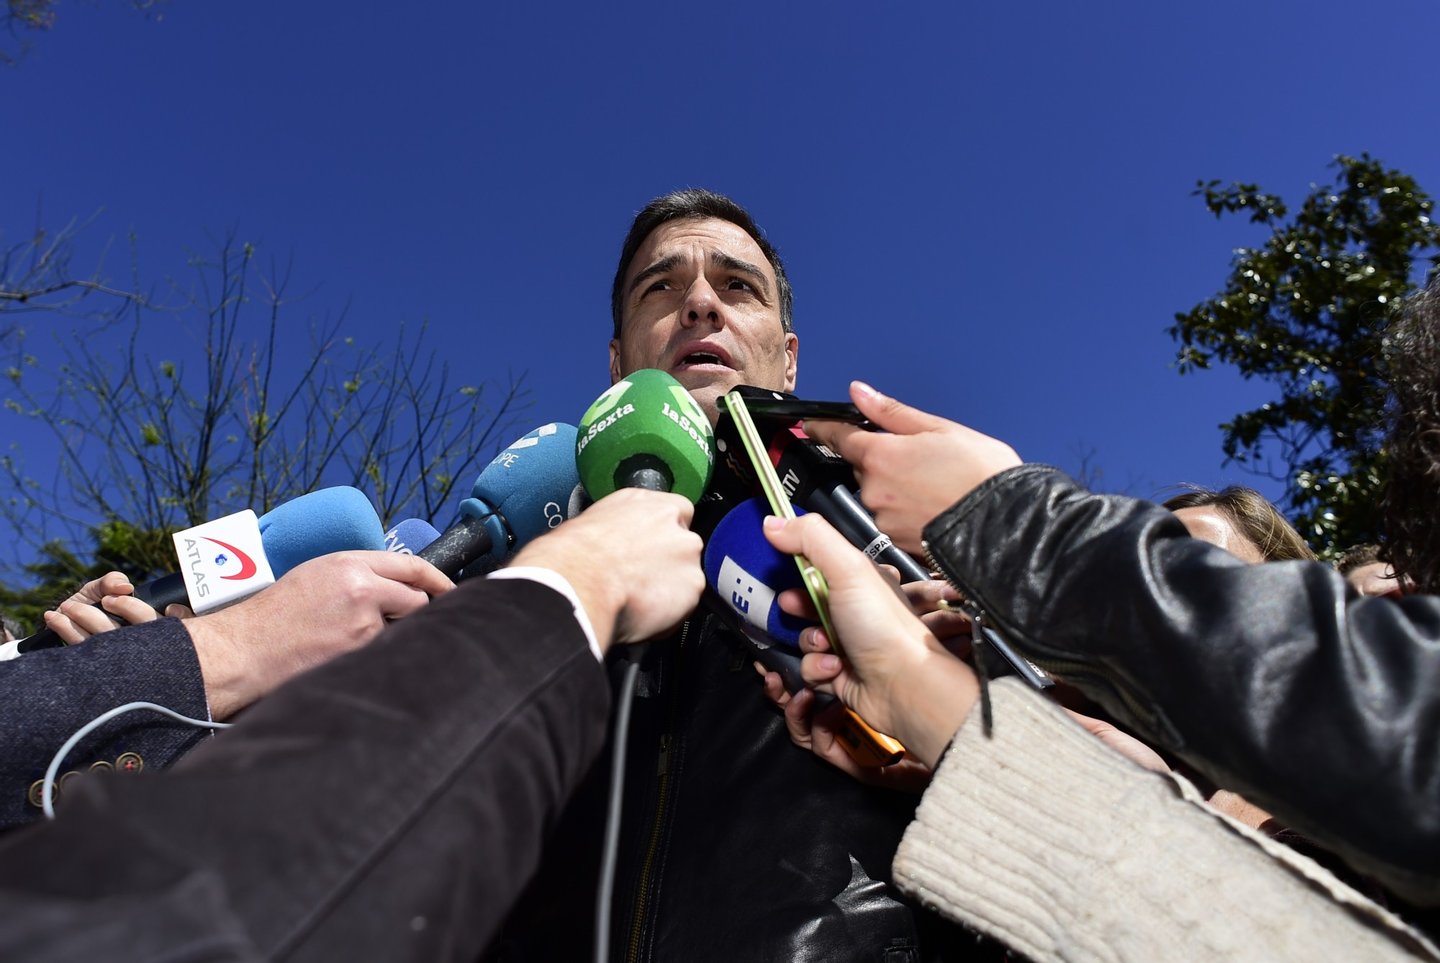 Leader of the Socialist Party (PSOE) Pedro Sanchez speaks to media before the traditional May Day rally in Madrid on May 1, 2016. / AFP / PIERRE-PHILIPPE MARCOU (Photo credit should read PIERRE-PHILIPPE MARCOU/AFP/Getty Images)